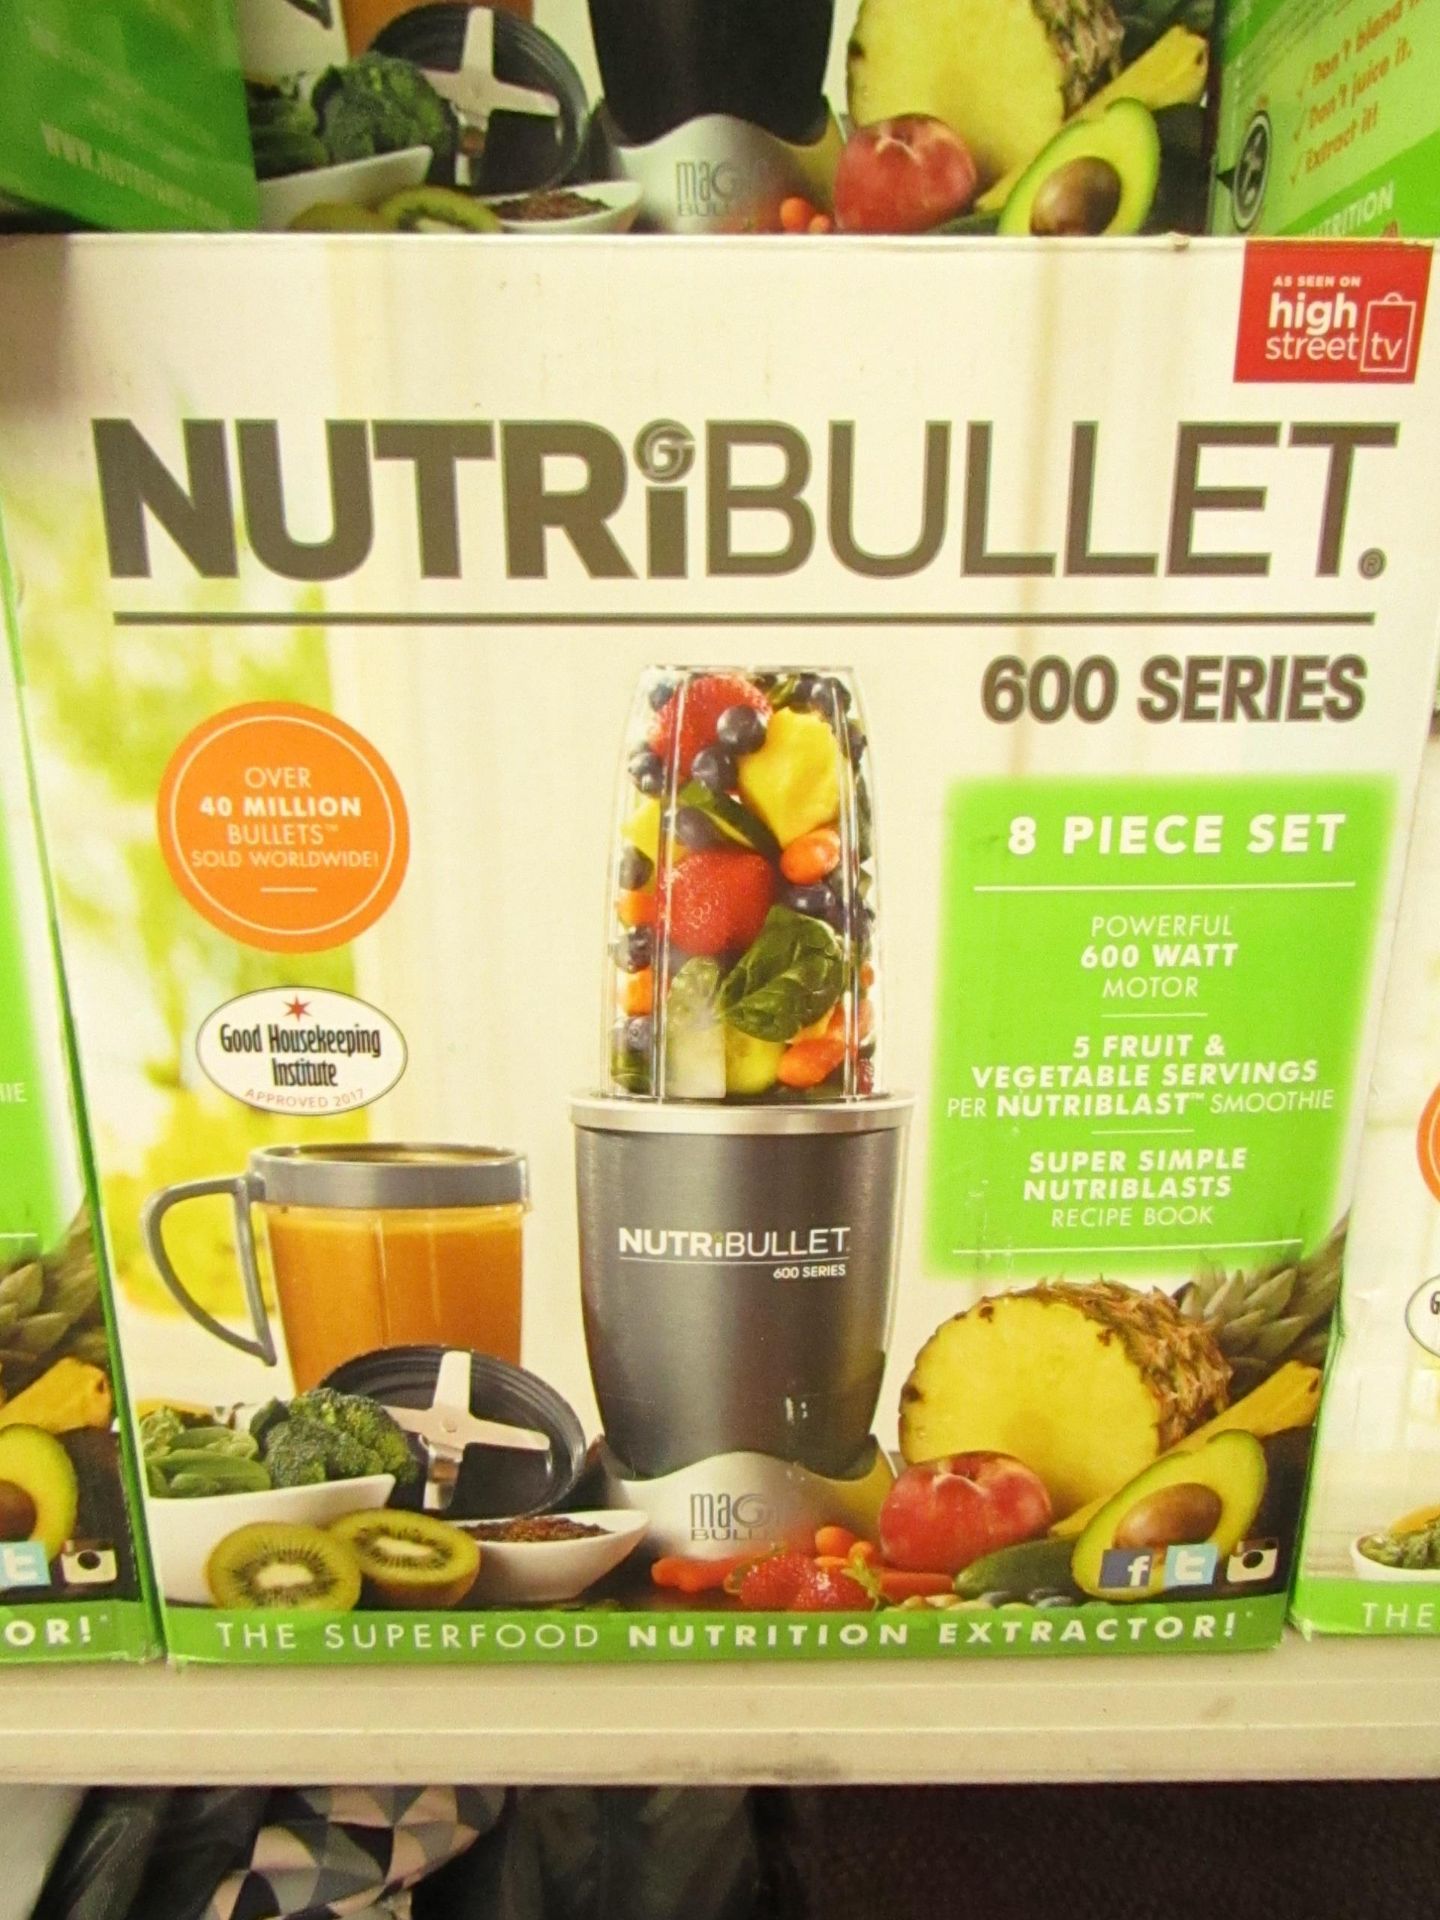 | 1x | NUTRIBULLET 600 SERIES | UNCHECKED AND BOXED | NO ONLINE RE-SALE | SKU C5060191467346 |